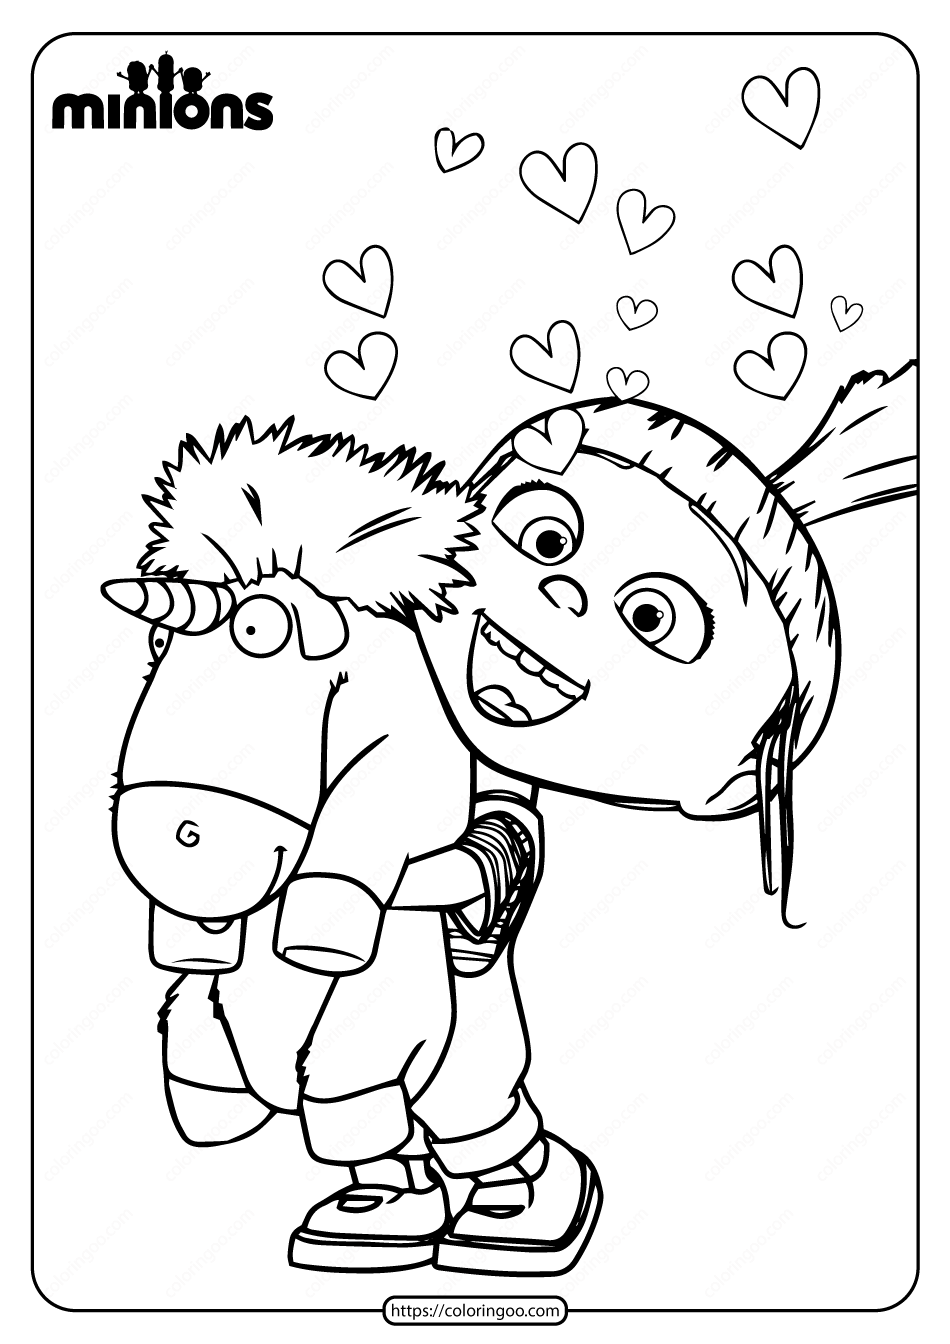 Free Printable Pdf Coloring Pages